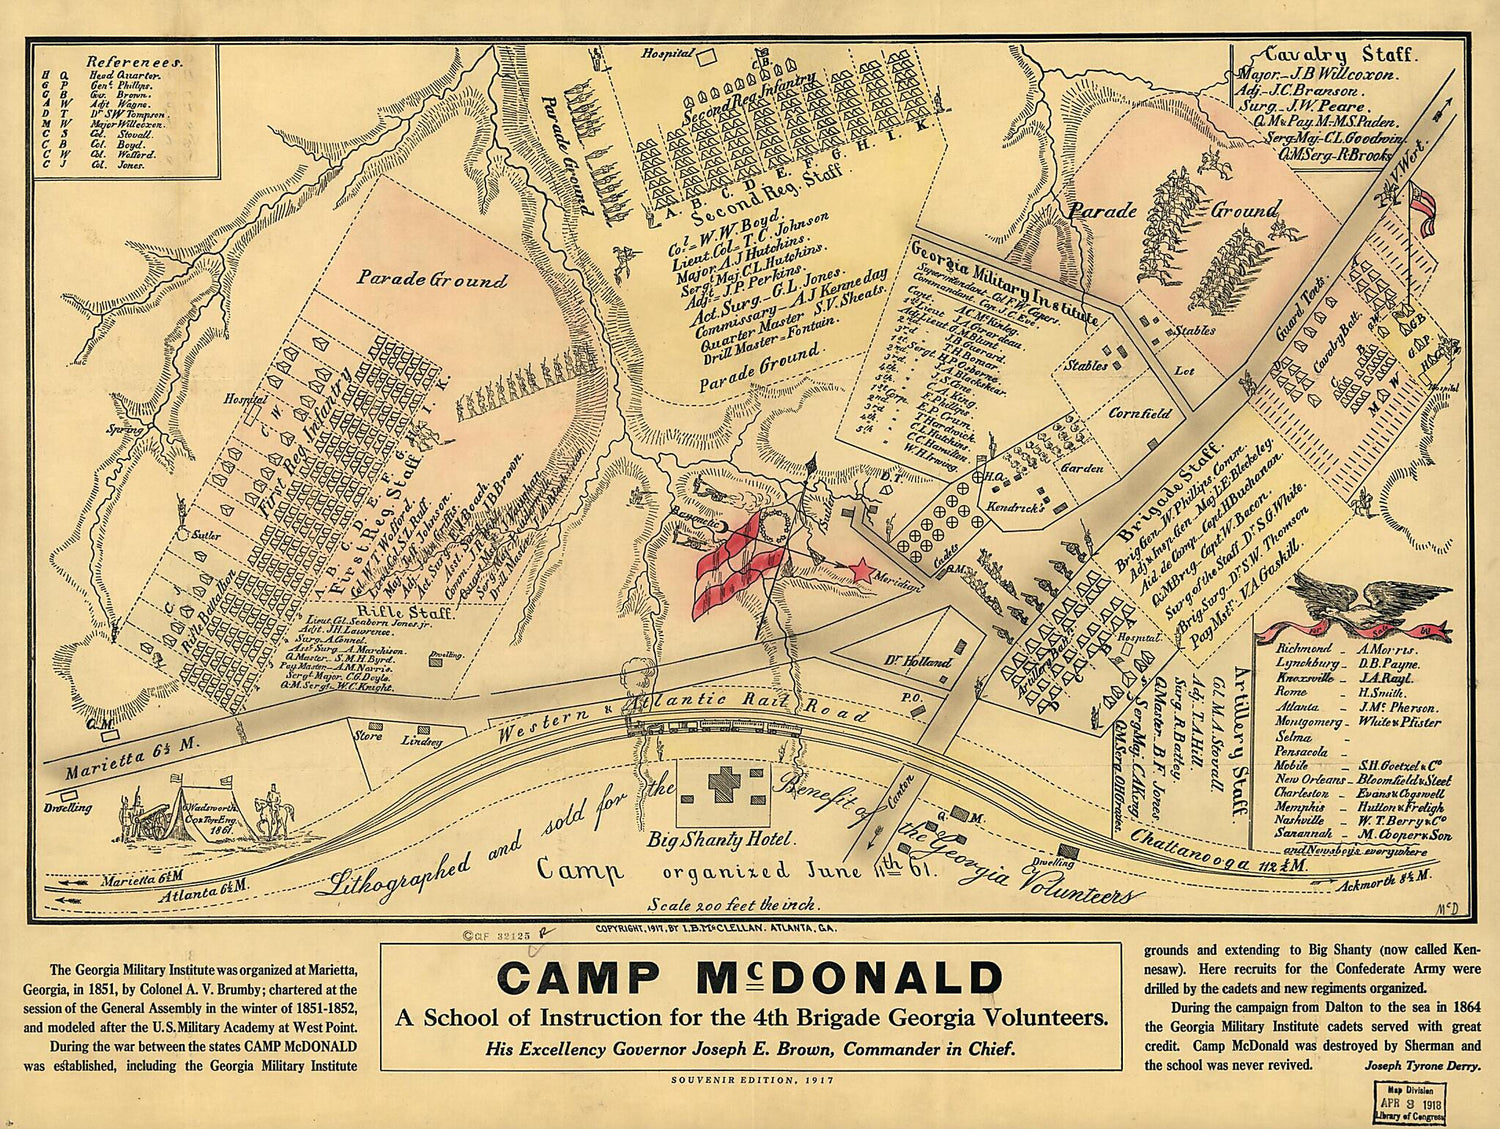 This old map of Camp McDonald; a School of Instruction for the 4th Brigade Georgia Volunteers from 1917 was created by I. B. McClellan in 1917